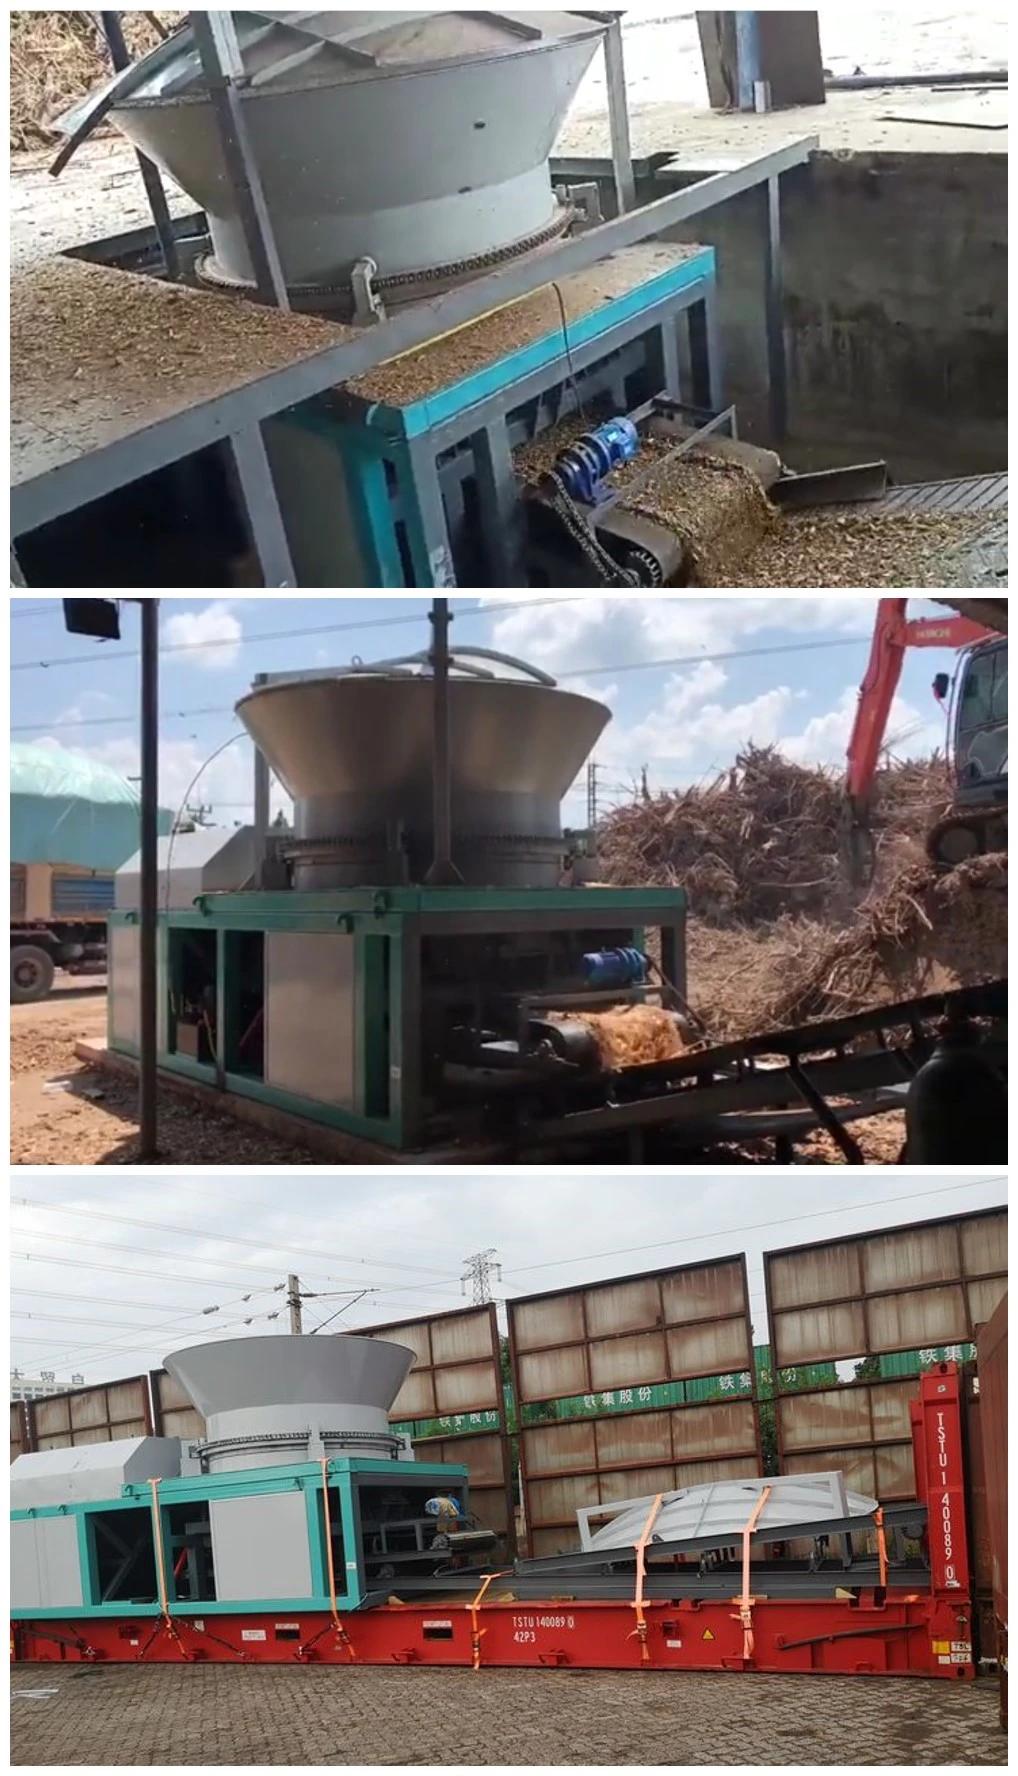 Shd Professional Waste Wood Crusher Machine with Nails Remover